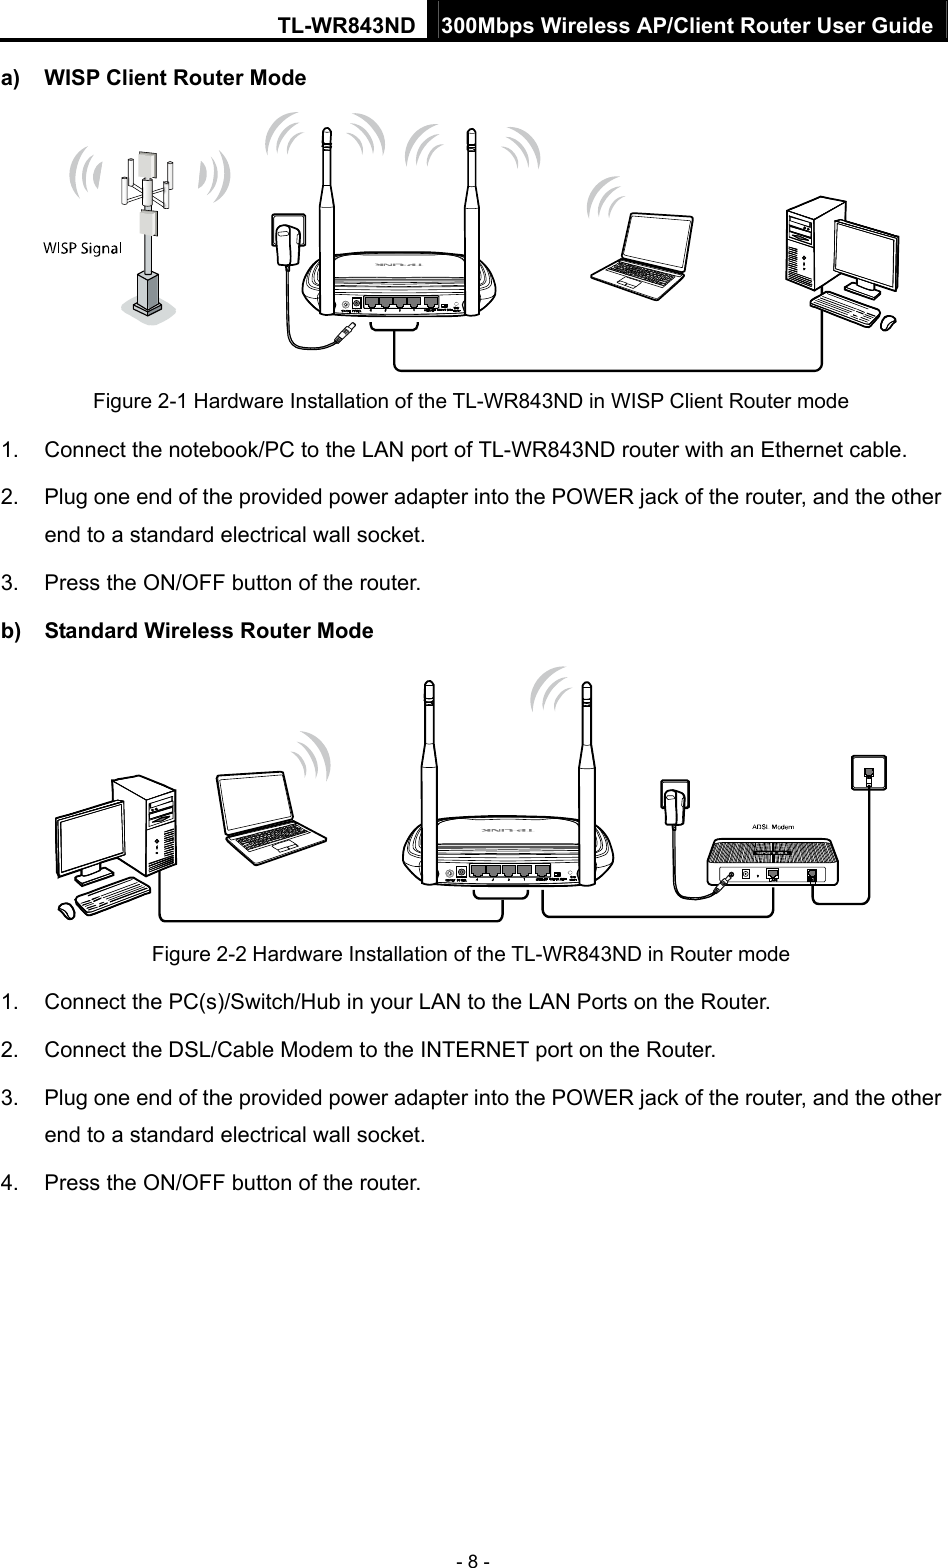 TL-WR843ND 300Mbps Wireless AP/Client Router User Guide - 8 - a)  WISP Client Router Mode  Figure 2-1 Hardware Installation of the TL-WR843ND in WISP Client Router mode 1.  Connect the notebook/PC to the LAN port of TL-WR843ND router with an Ethernet cable. 2.  Plug one end of the provided power adapter into the POWER jack of the router, and the other end to a standard electrical wall socket. 3.  Press the ON/OFF button of the router. b)  Standard Wireless Router Mode  Figure 2-2 Hardware Installation of the TL-WR843ND in Router mode 1.  Connect the PC(s)/Switch/Hub in your LAN to the LAN Ports on the Router. 2.  Connect the DSL/Cable Modem to the INTERNET port on the Router. 3.  Plug one end of the provided power adapter into the POWER jack of the router, and the other end to a standard electrical wall socket.   4.  Press the ON/OFF button of the router. 